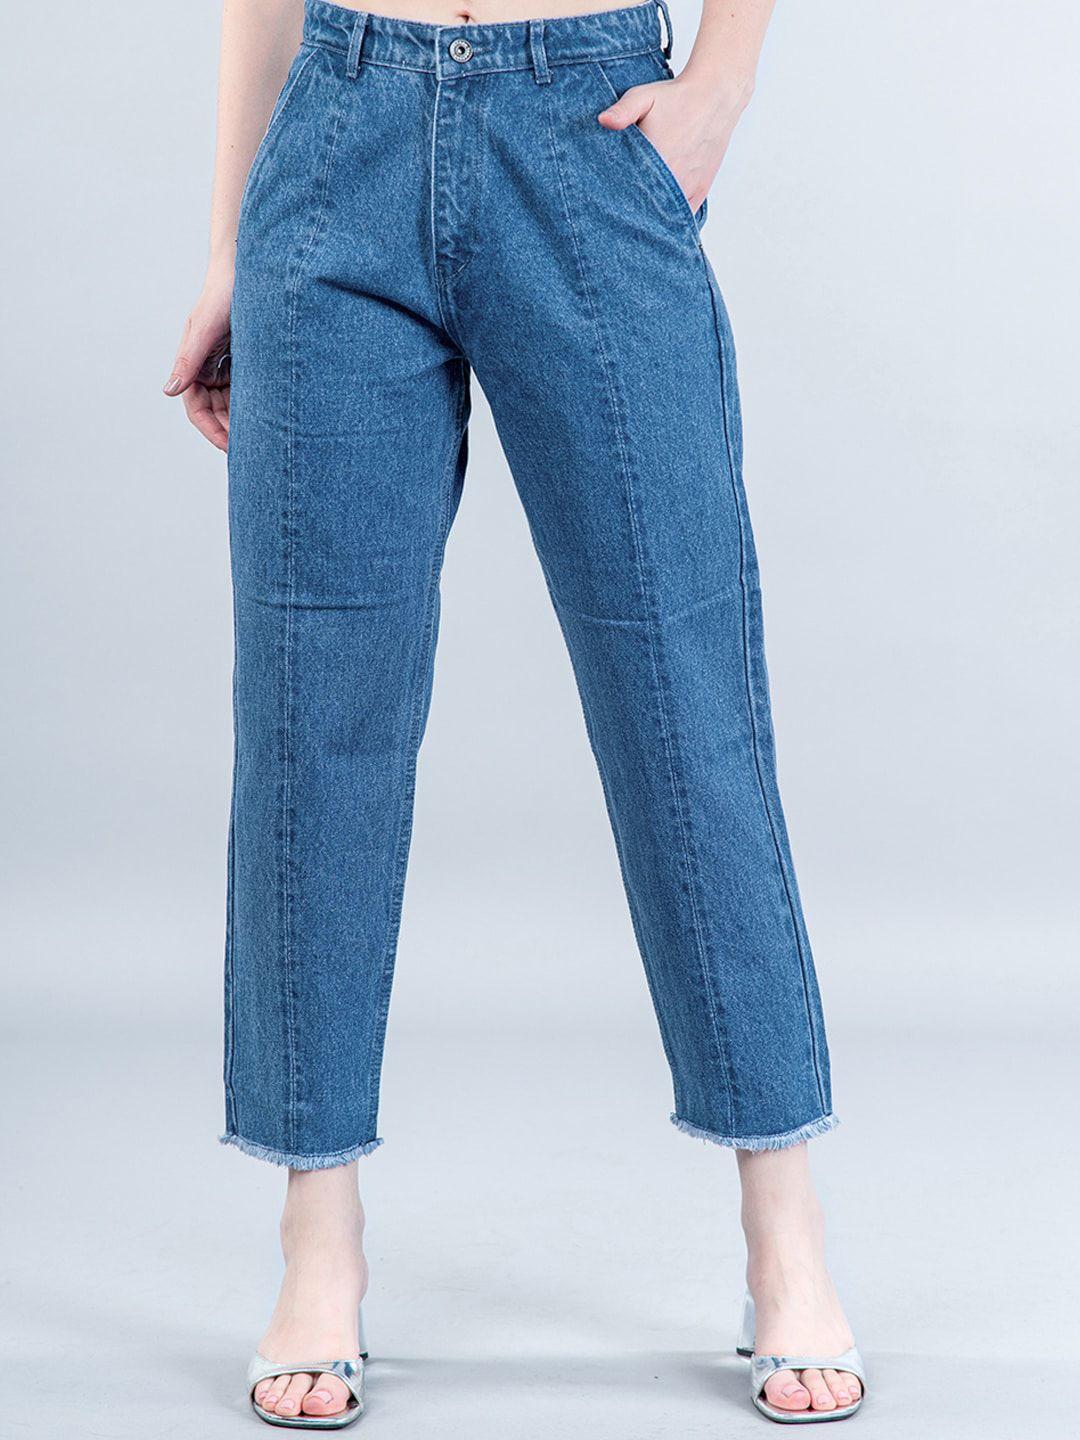 tistabene-women-comfort-cropped-cotton-mom-fit-jeans